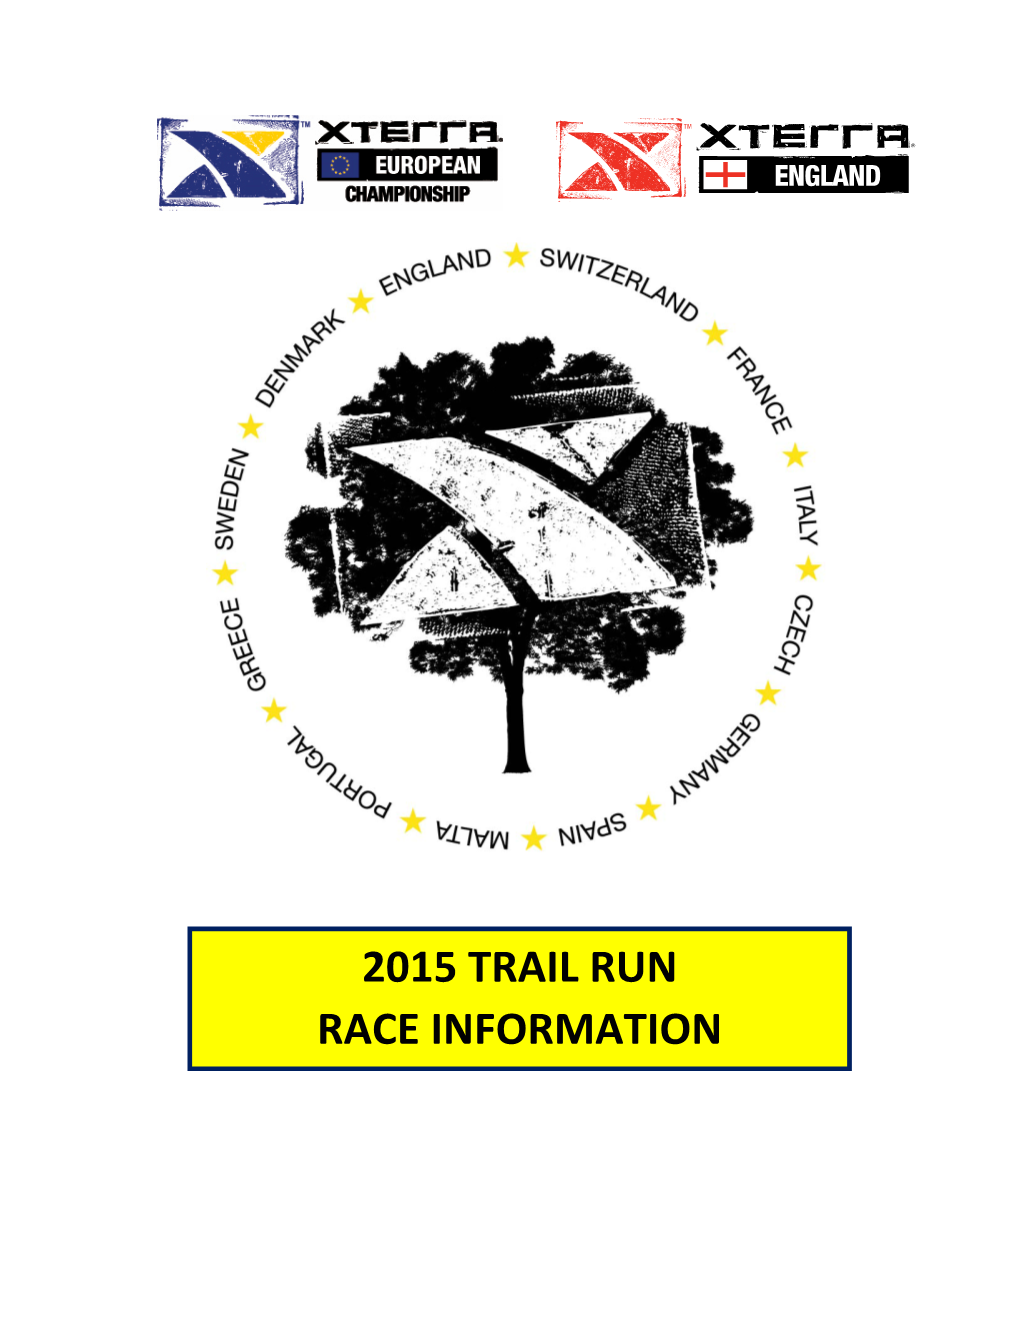 2015 TRAIL RUN RACE Informationwelcome to XTERRA Thank You for Taking Part in the XTERRA England Trail Runs